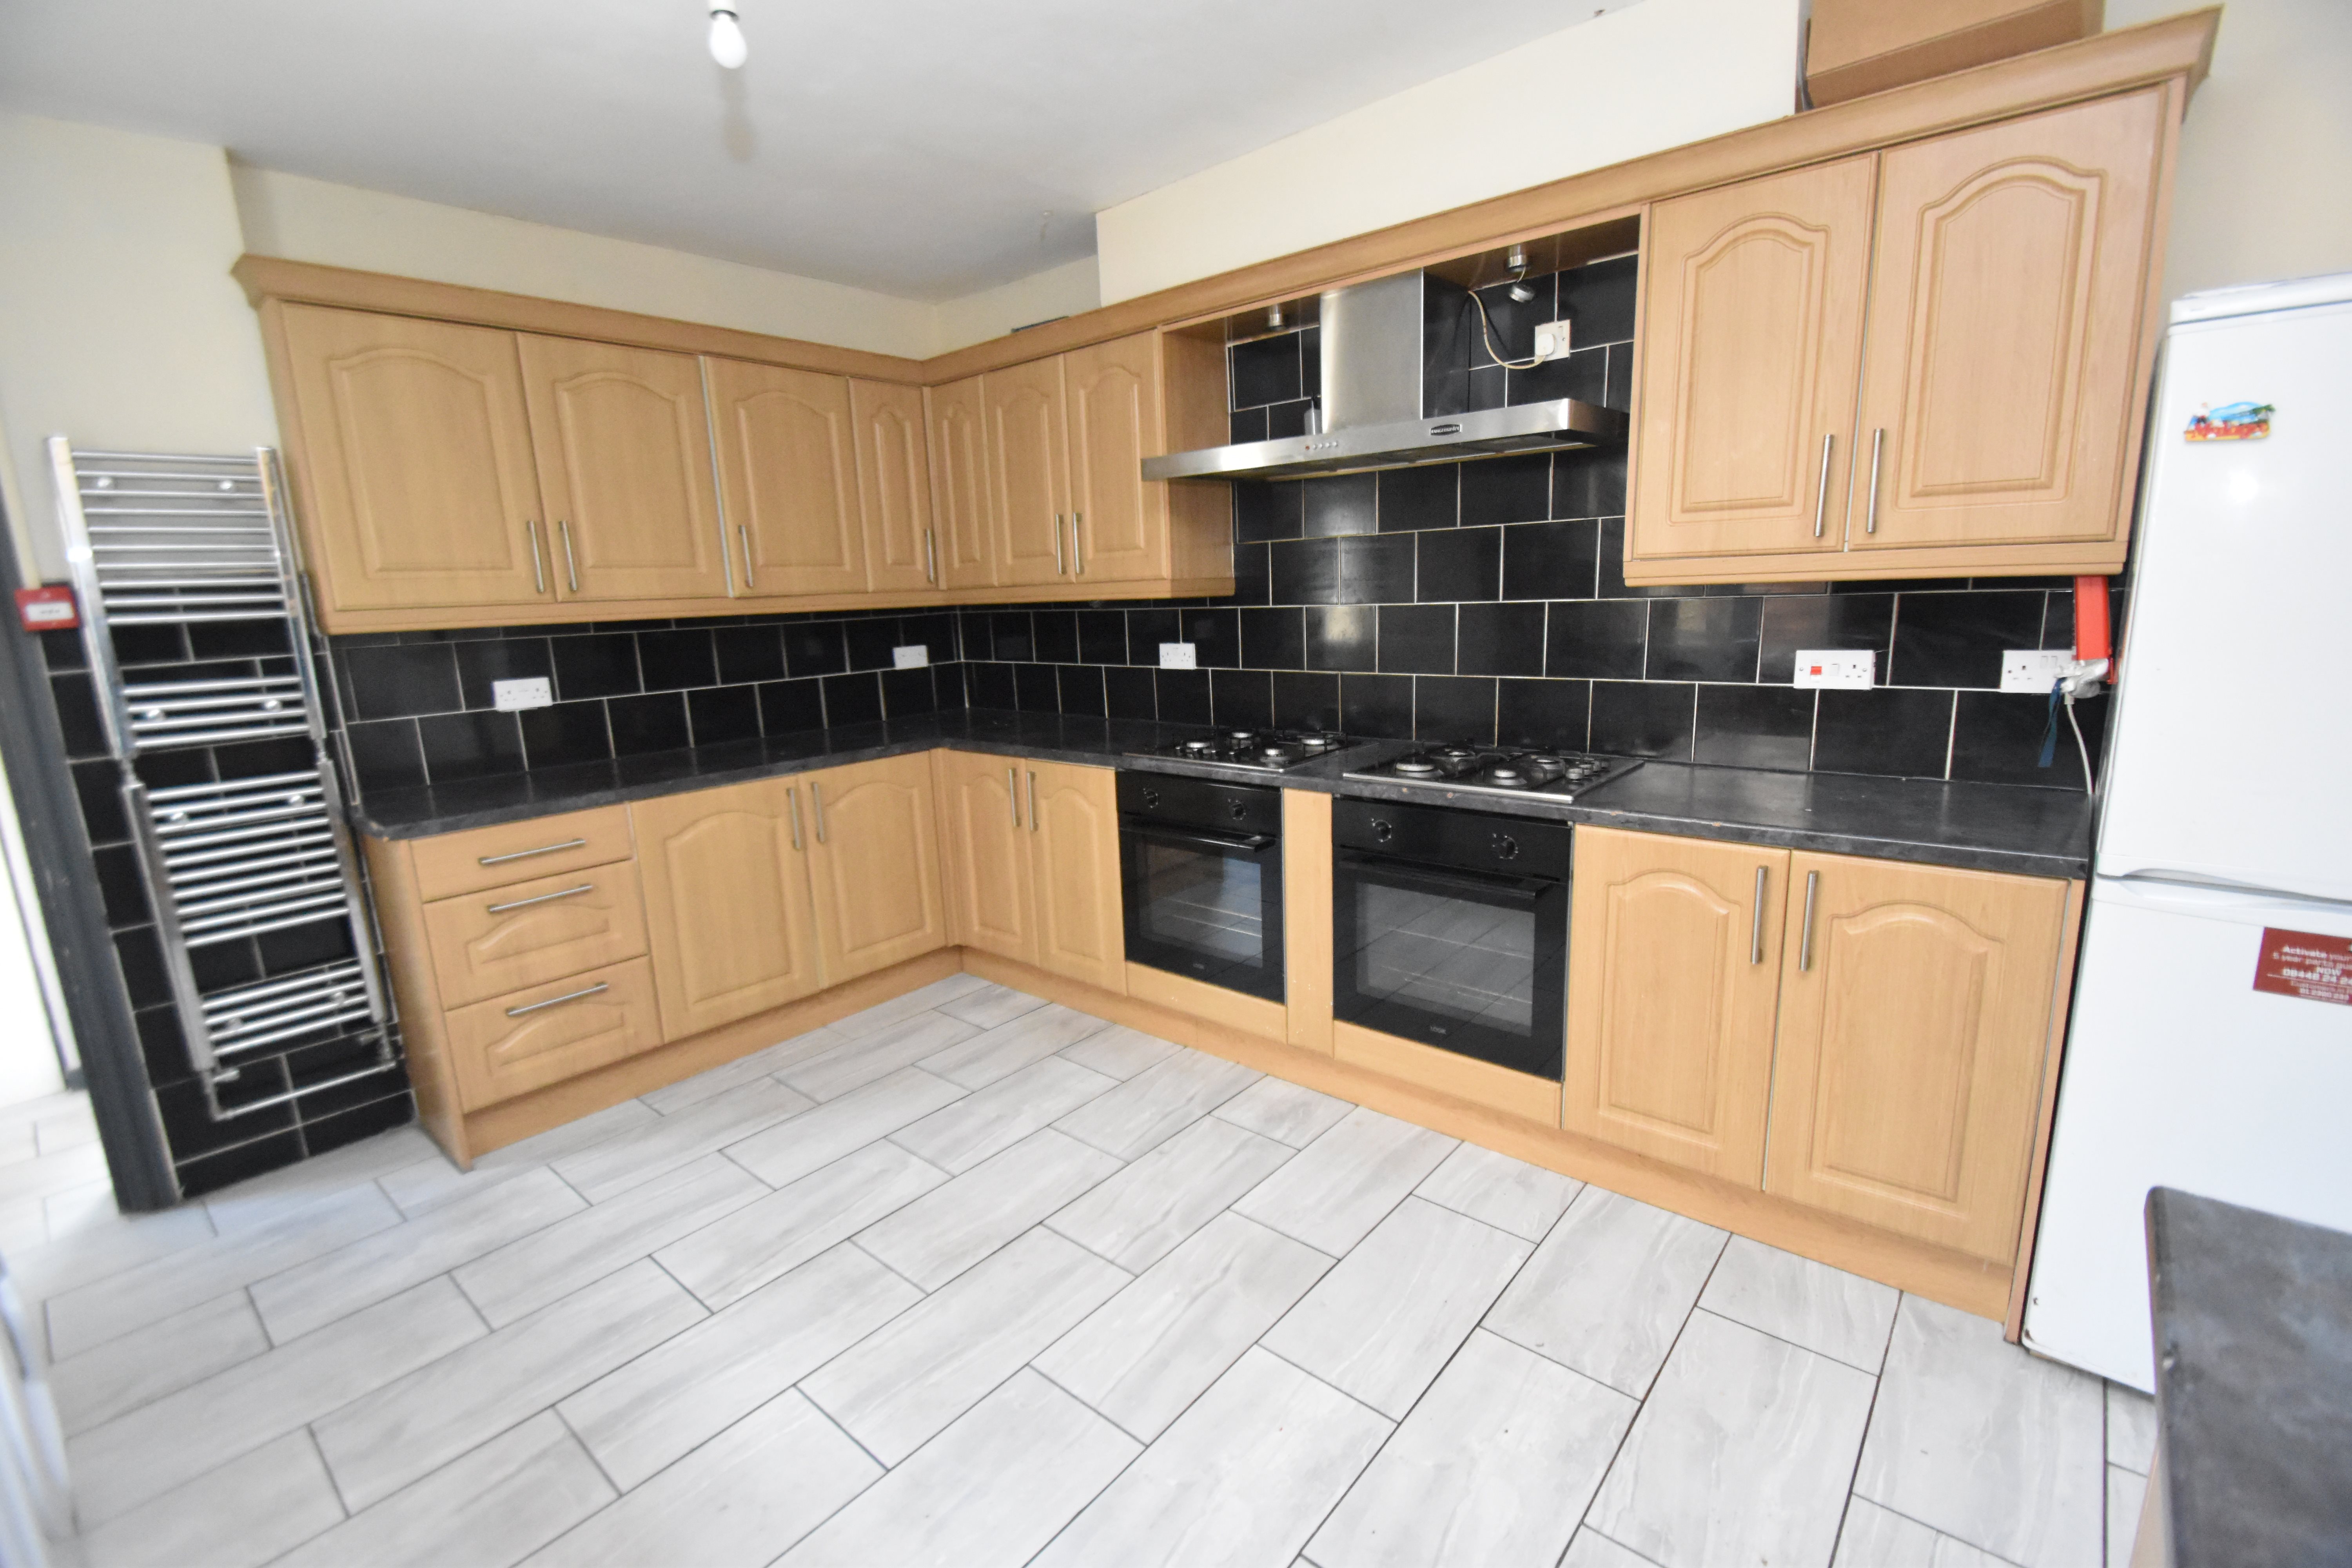 8 bed house to rent in Harriet Street, CATHAYS  - Property Image 3